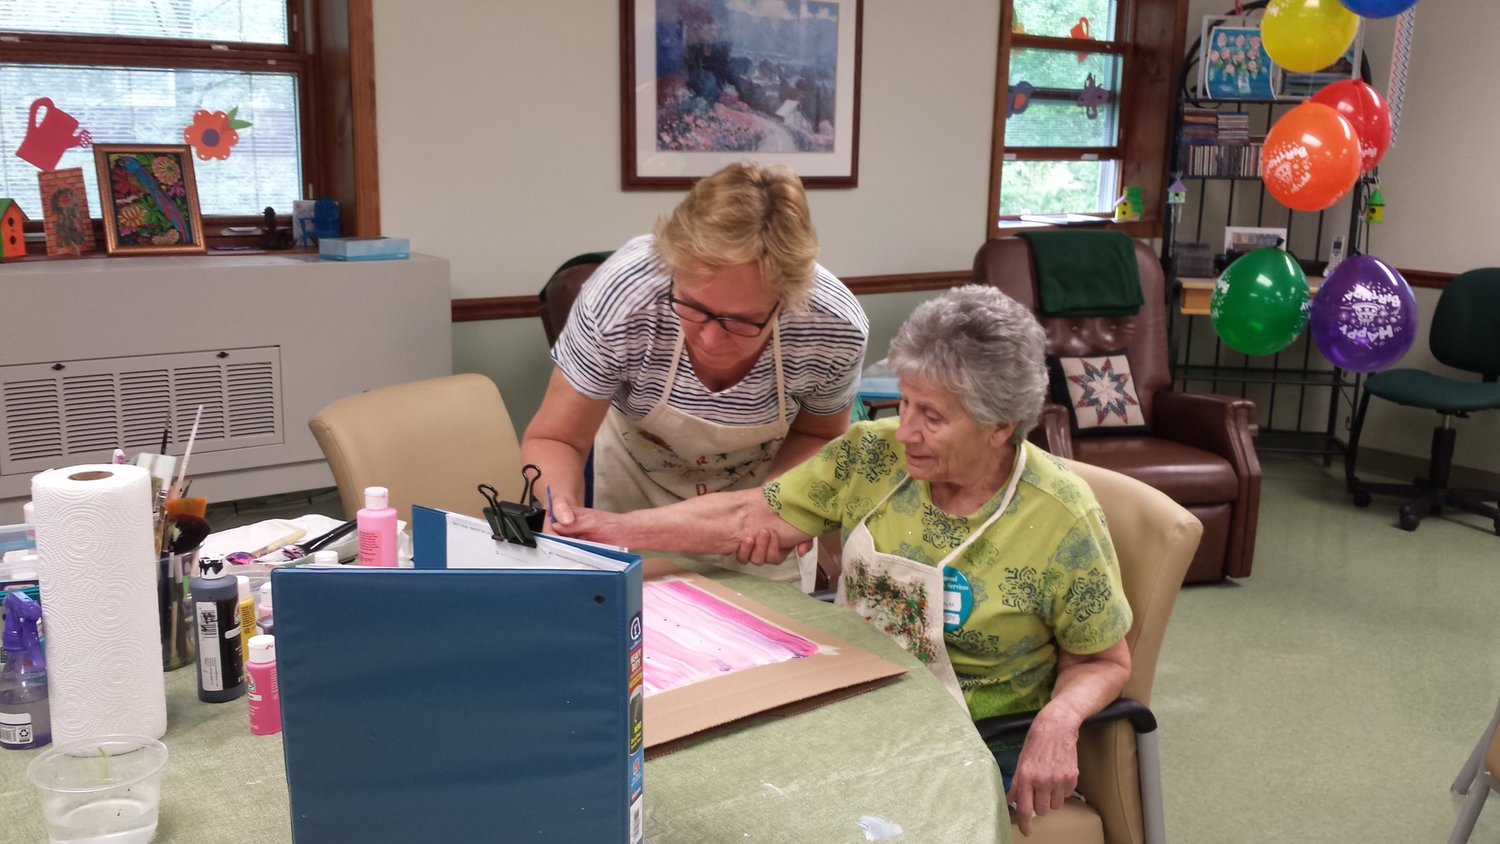 Learning to paint at the Wayne County Adult Day Living Center.